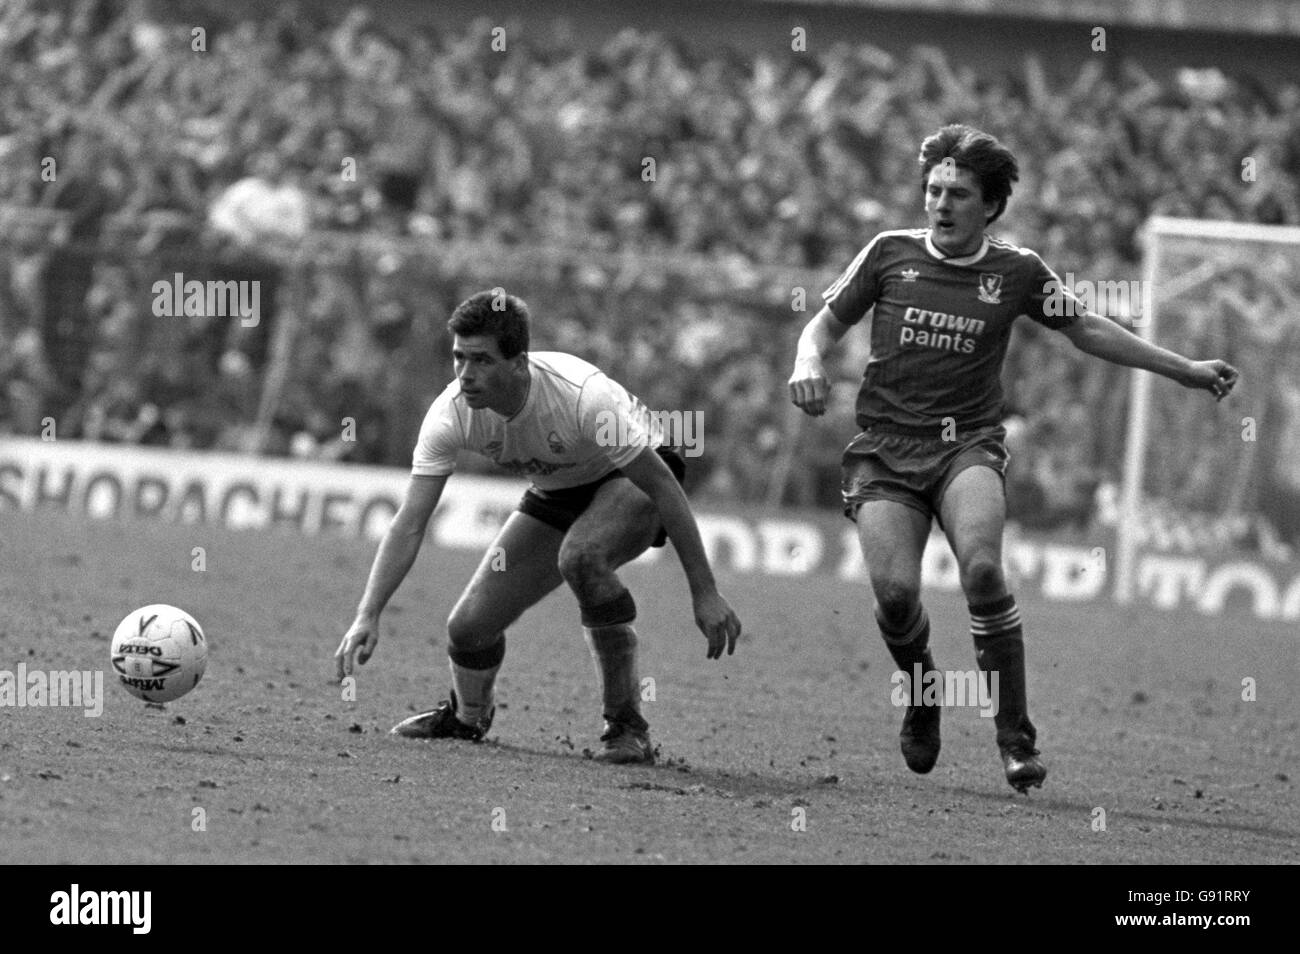 Soccer - FA Cup Semi Final - Nottingham Forest v Liverpool. Nottingham Forest's Neil Webb (left) and Liverpool's Peter Beardsley in action during the match Stock Photo